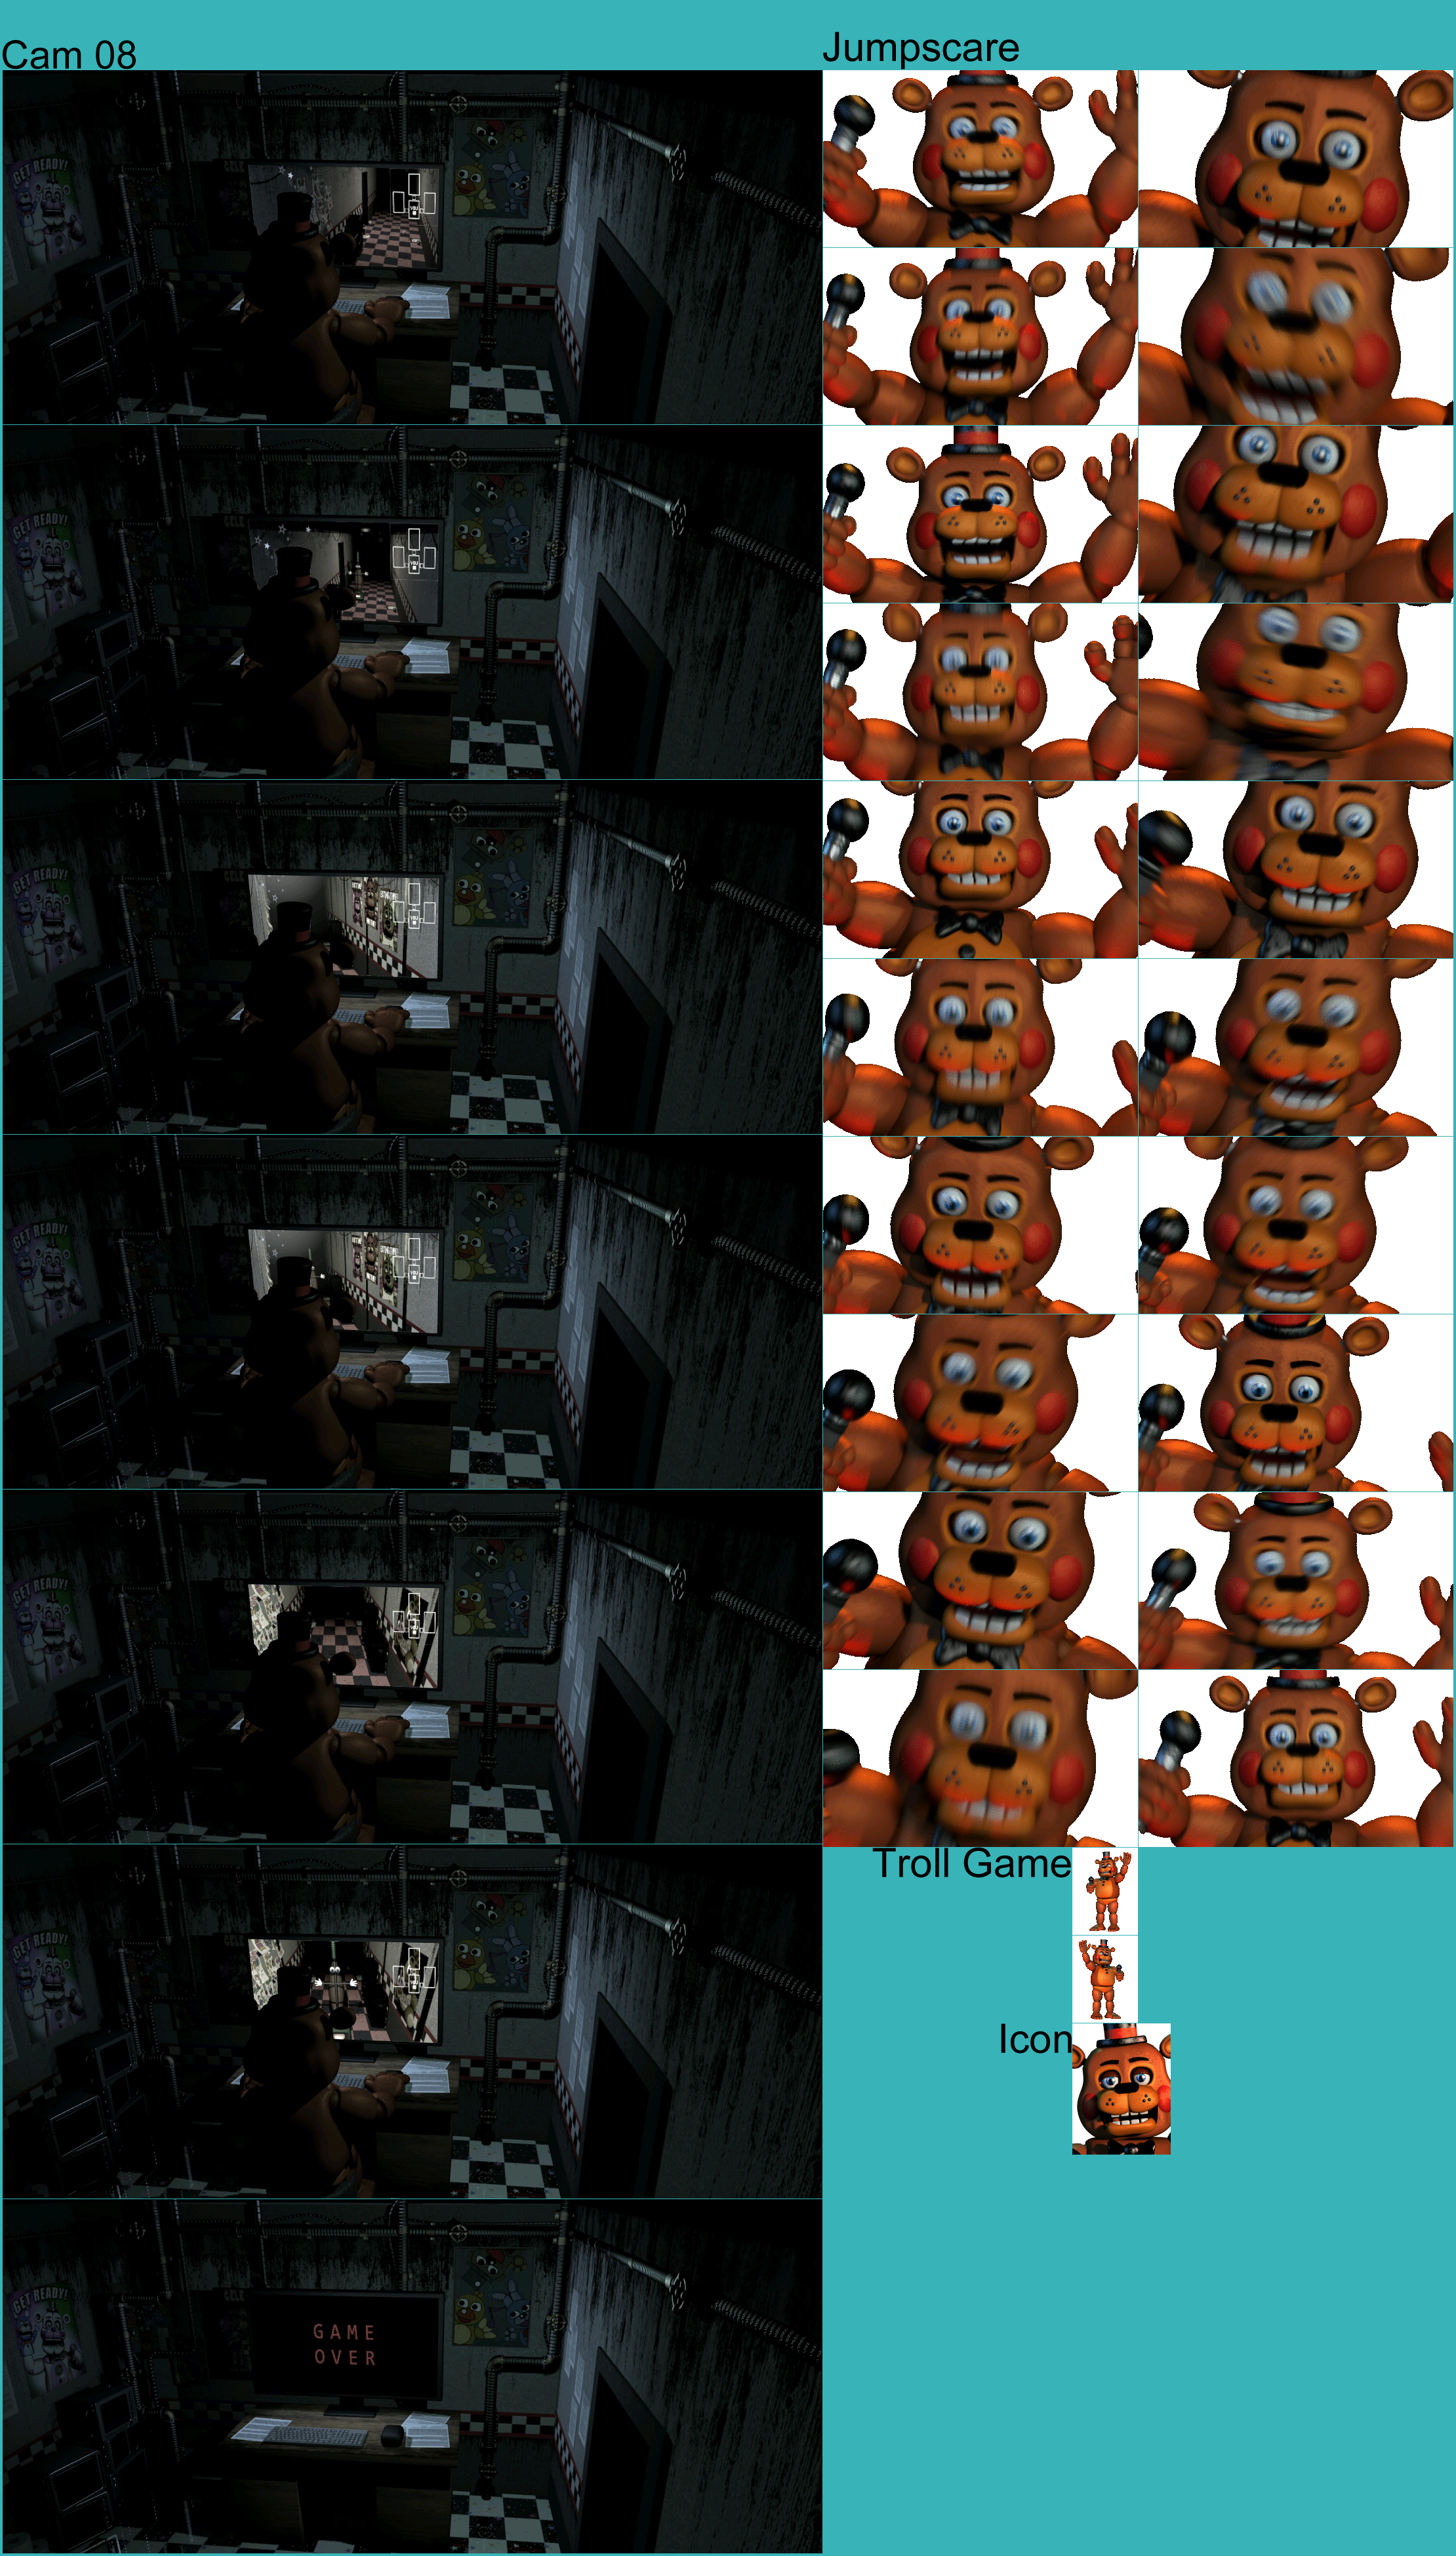 PC / Computer - Ultimate Custom Night - Toy Freddy - The Spriters Resource